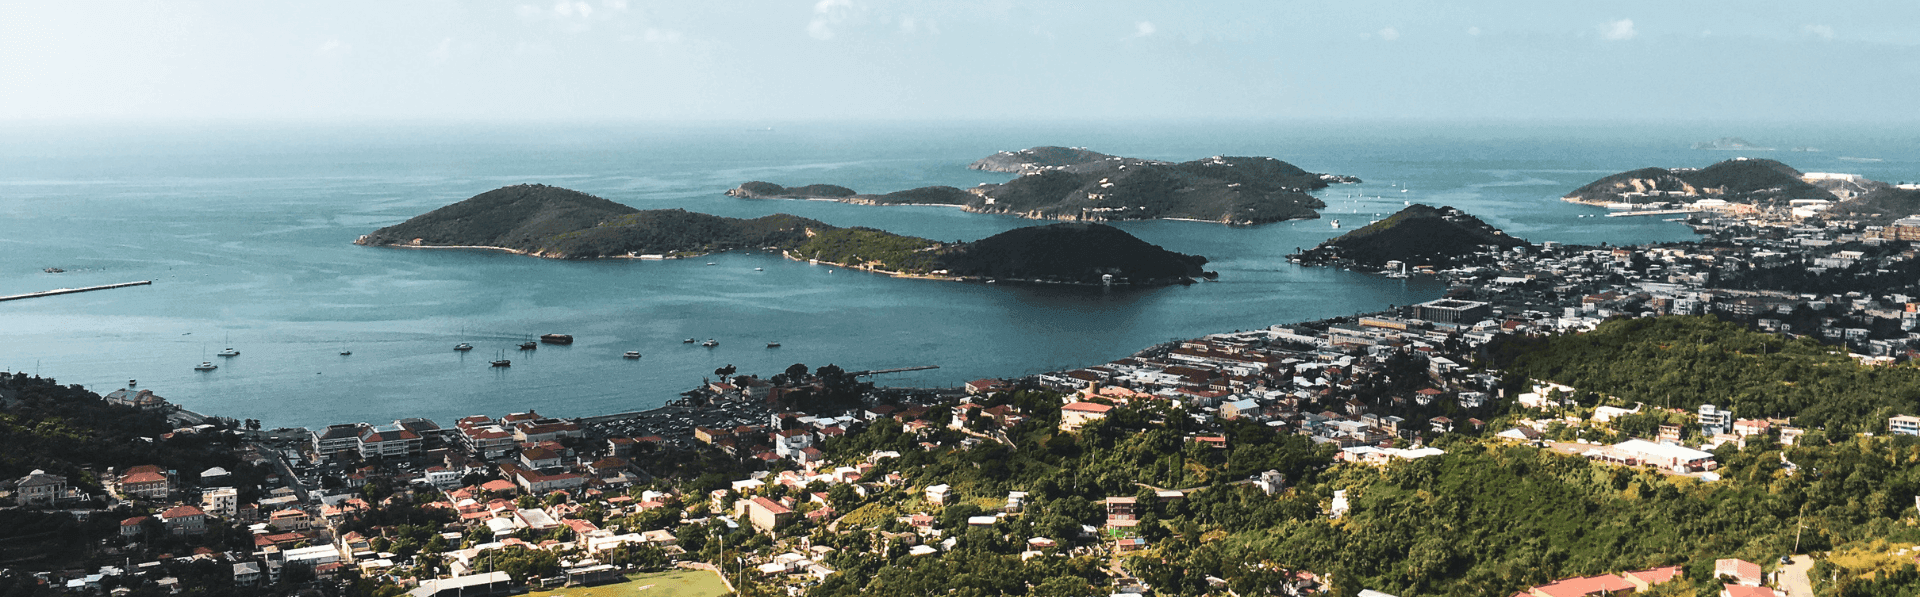 The Ultimate Shopping Guide for the Virgin Islands